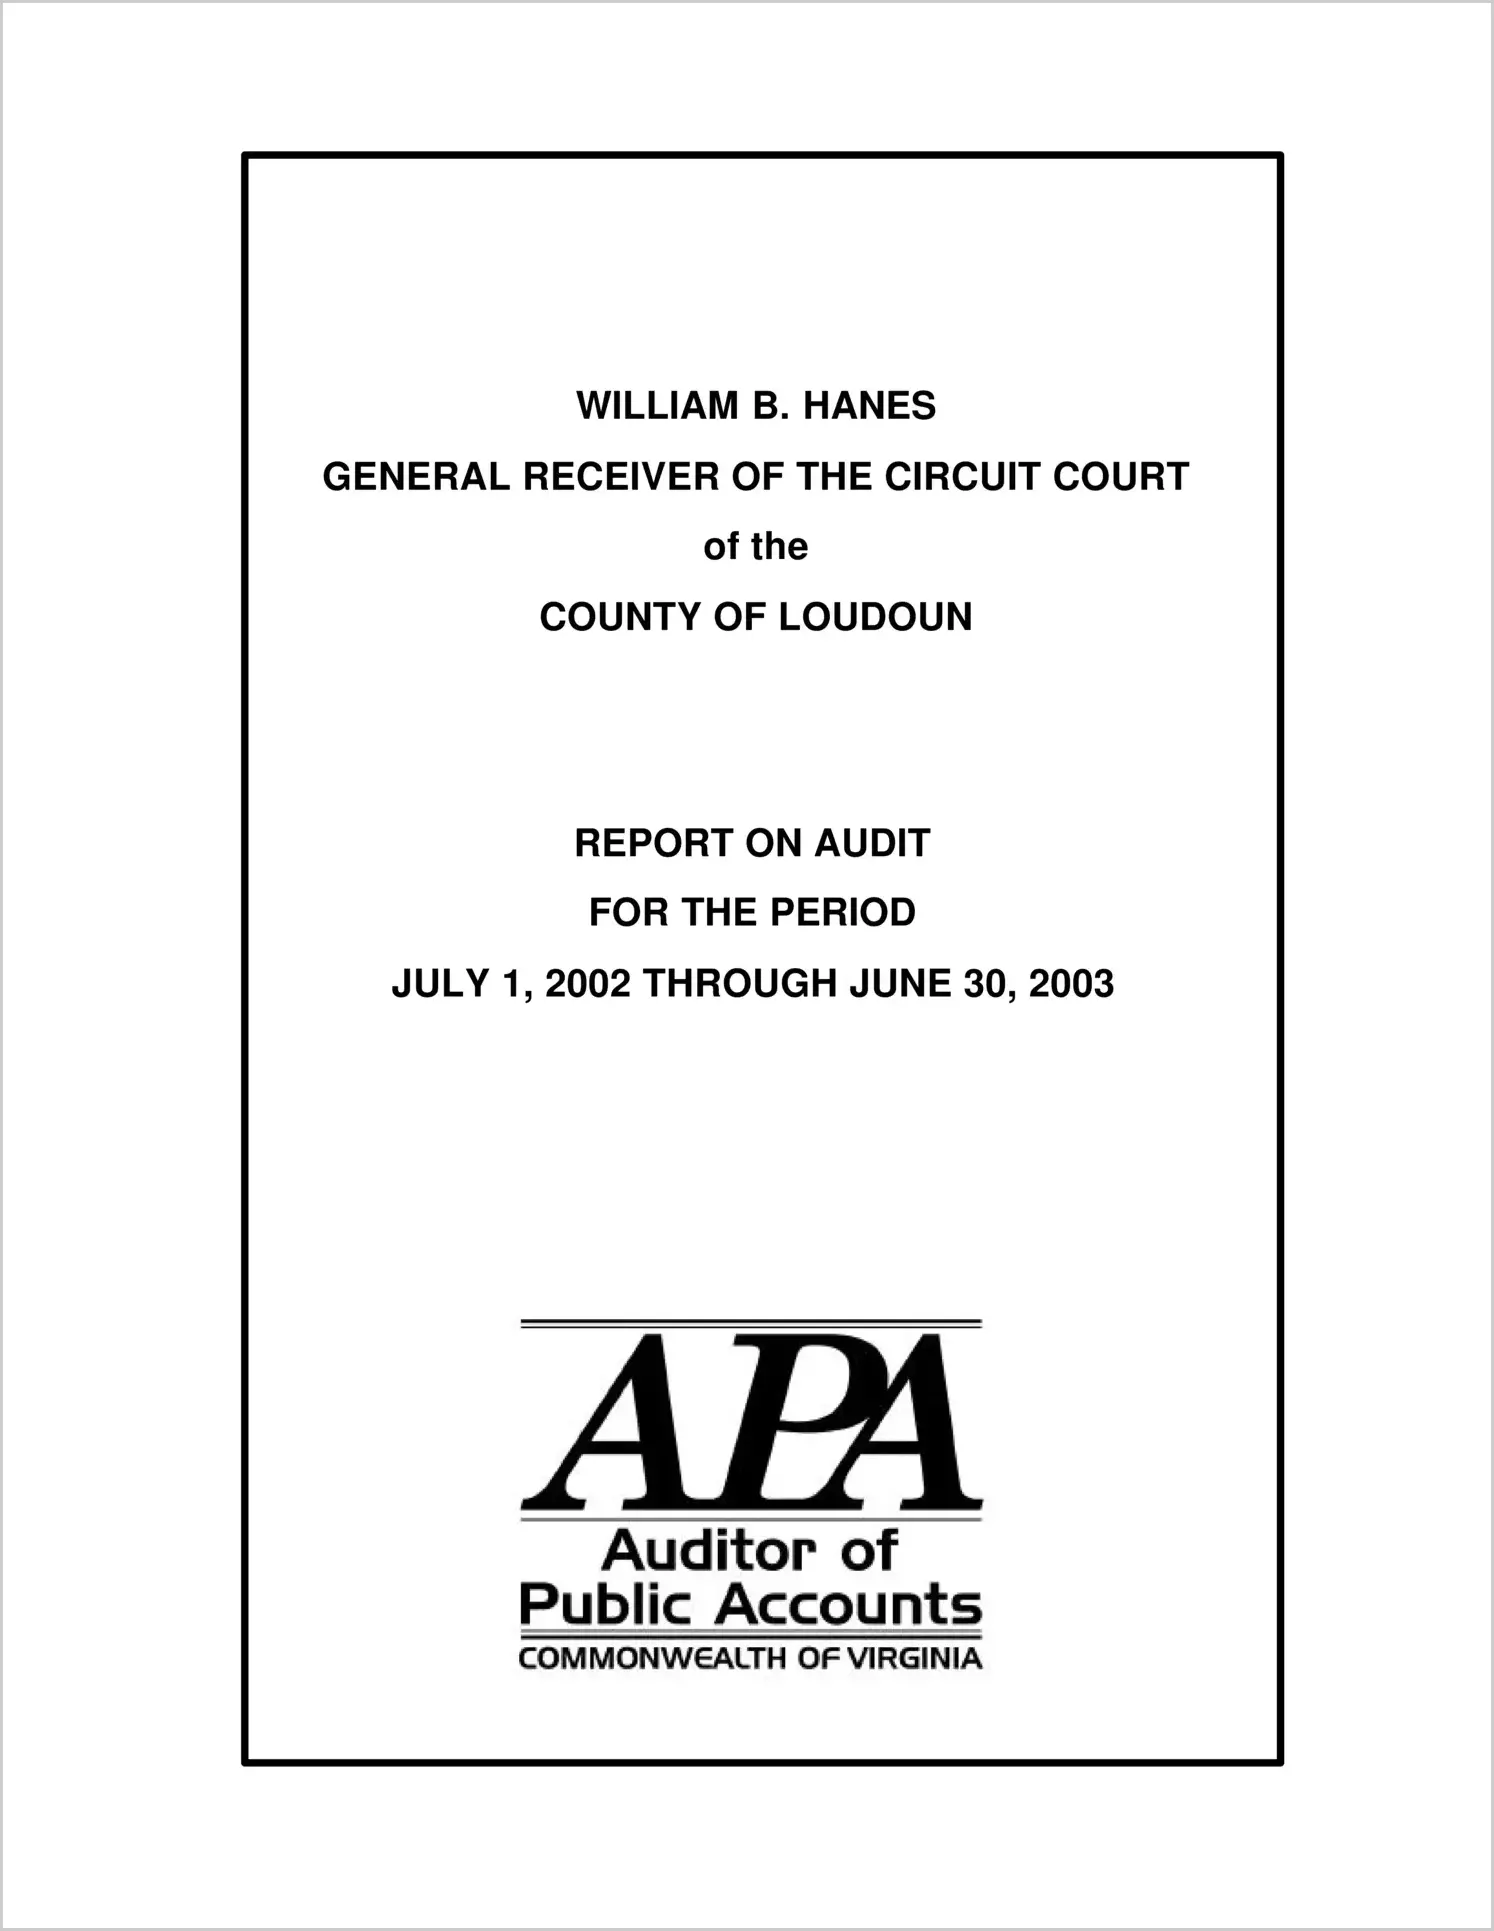 General Receiver of the Circuit Court of the County of Loudoun for the year ended June 30, 2003